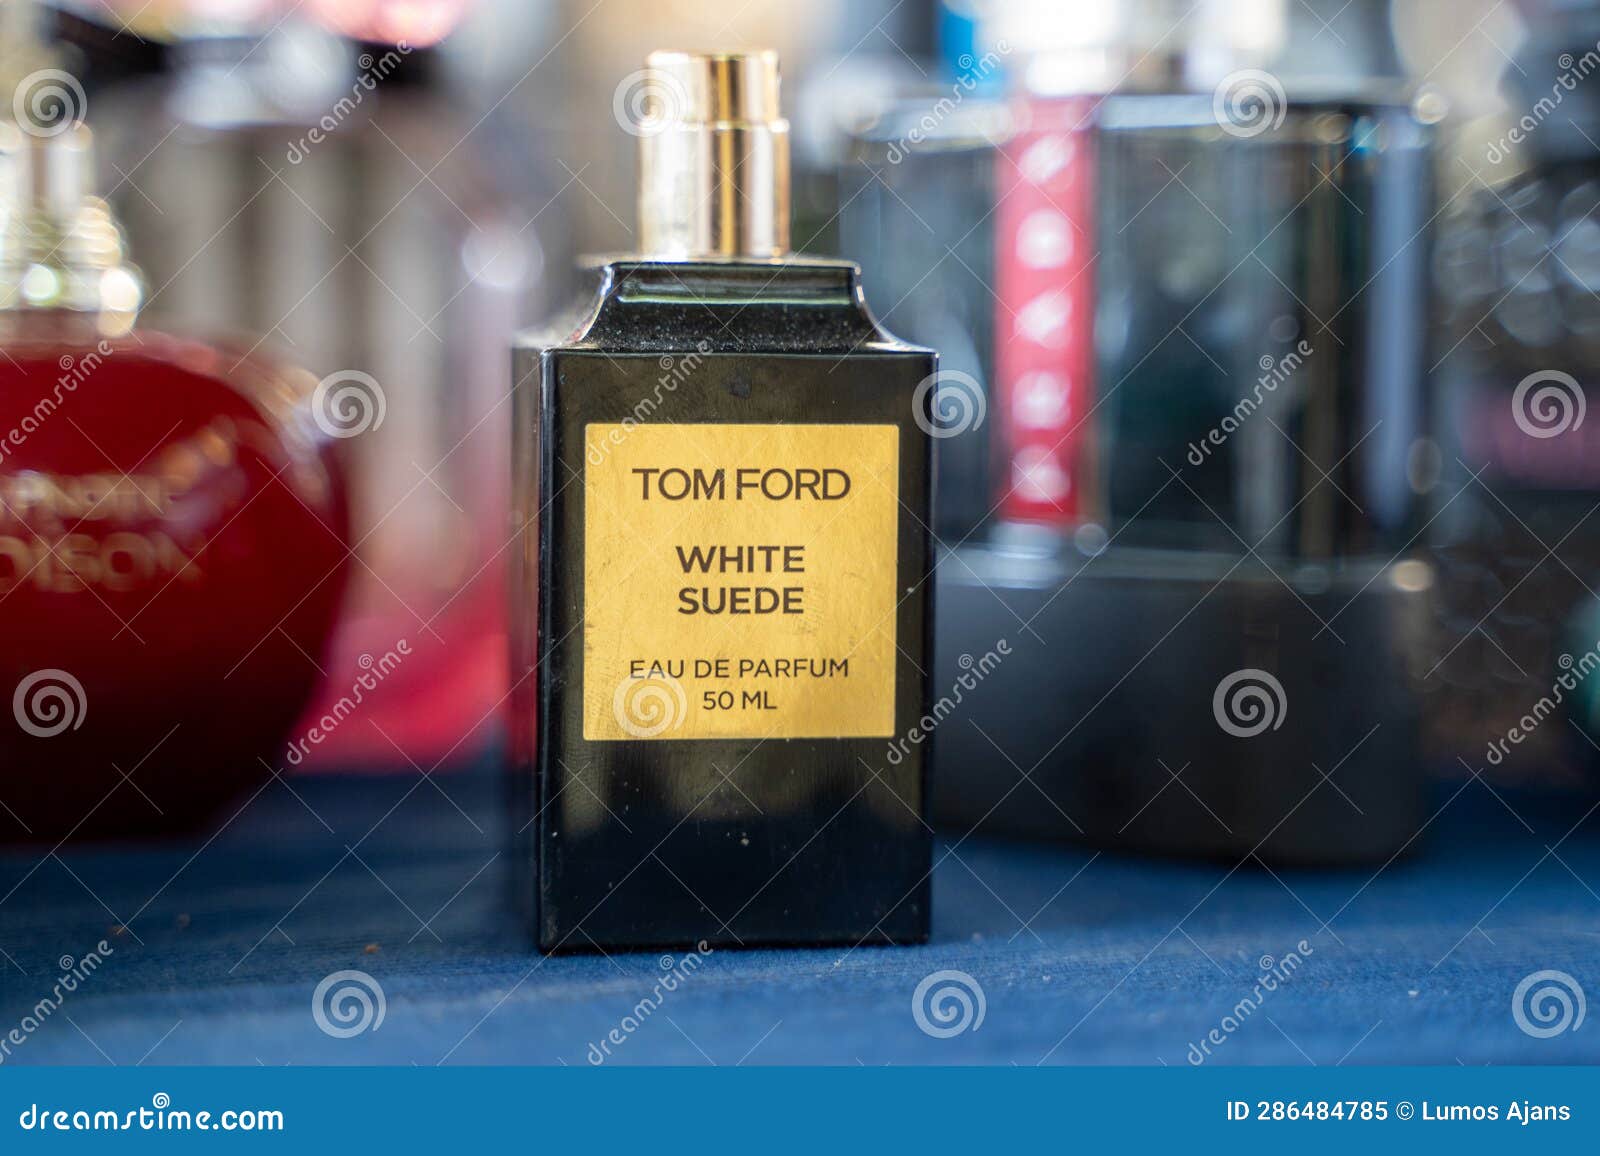 Tom Ford White Suede Perfume Bottle at the Flea Market. Editorial Image ...